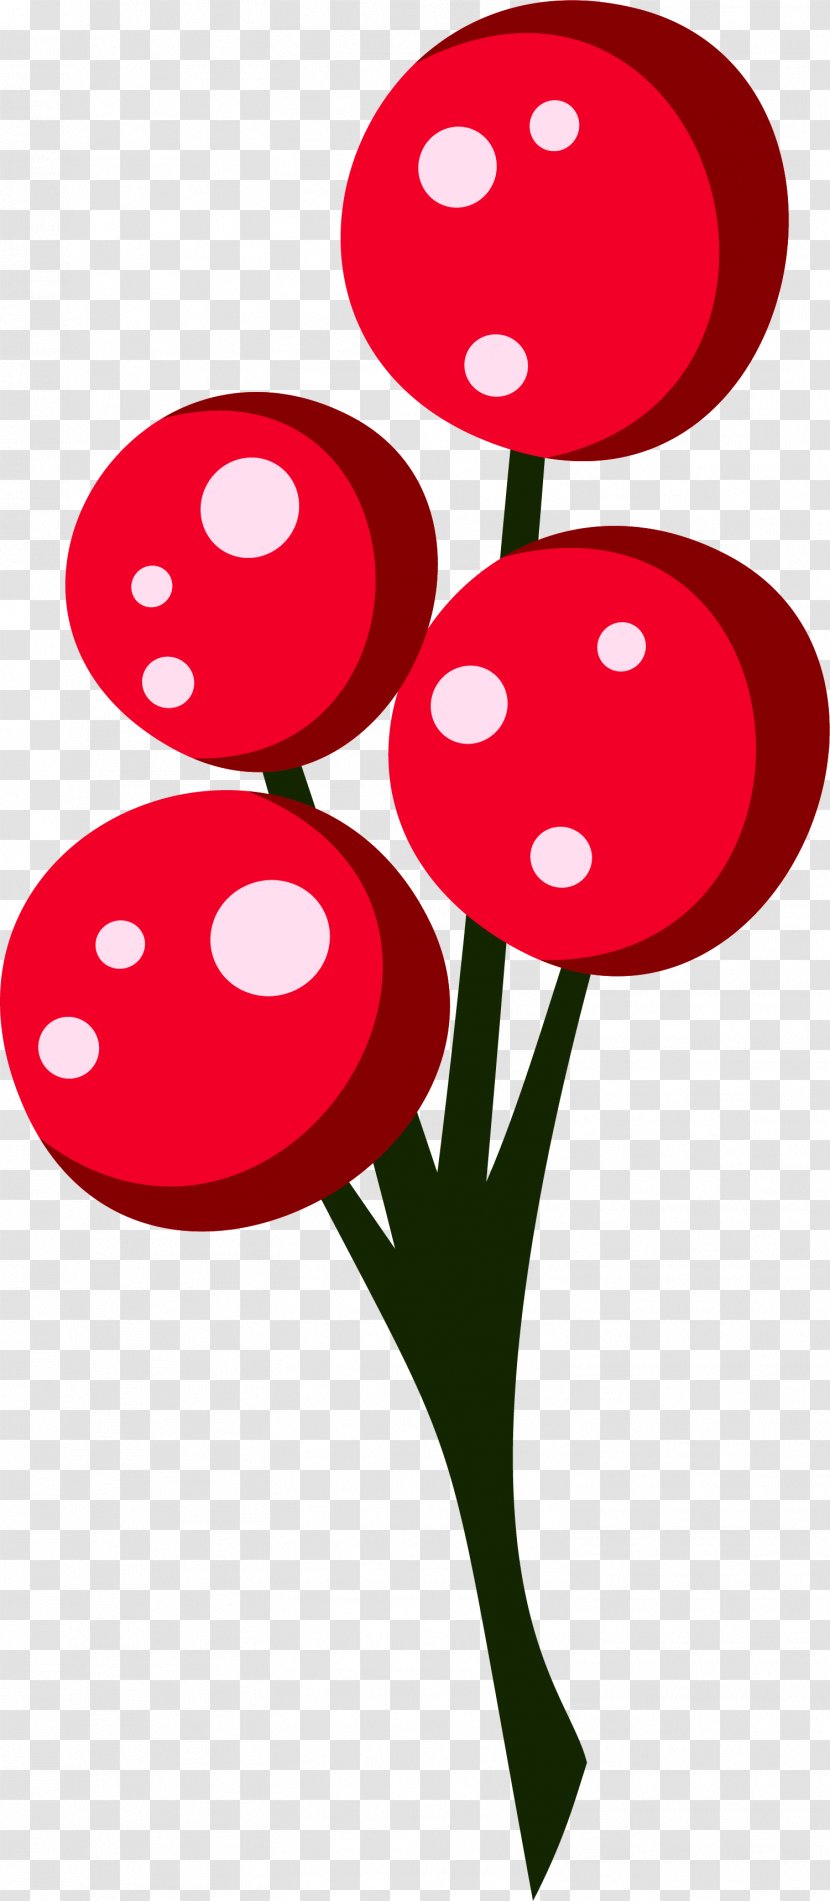 Cherry Red Fruit Illustration - Heart - Hand Painted Transparent PNG